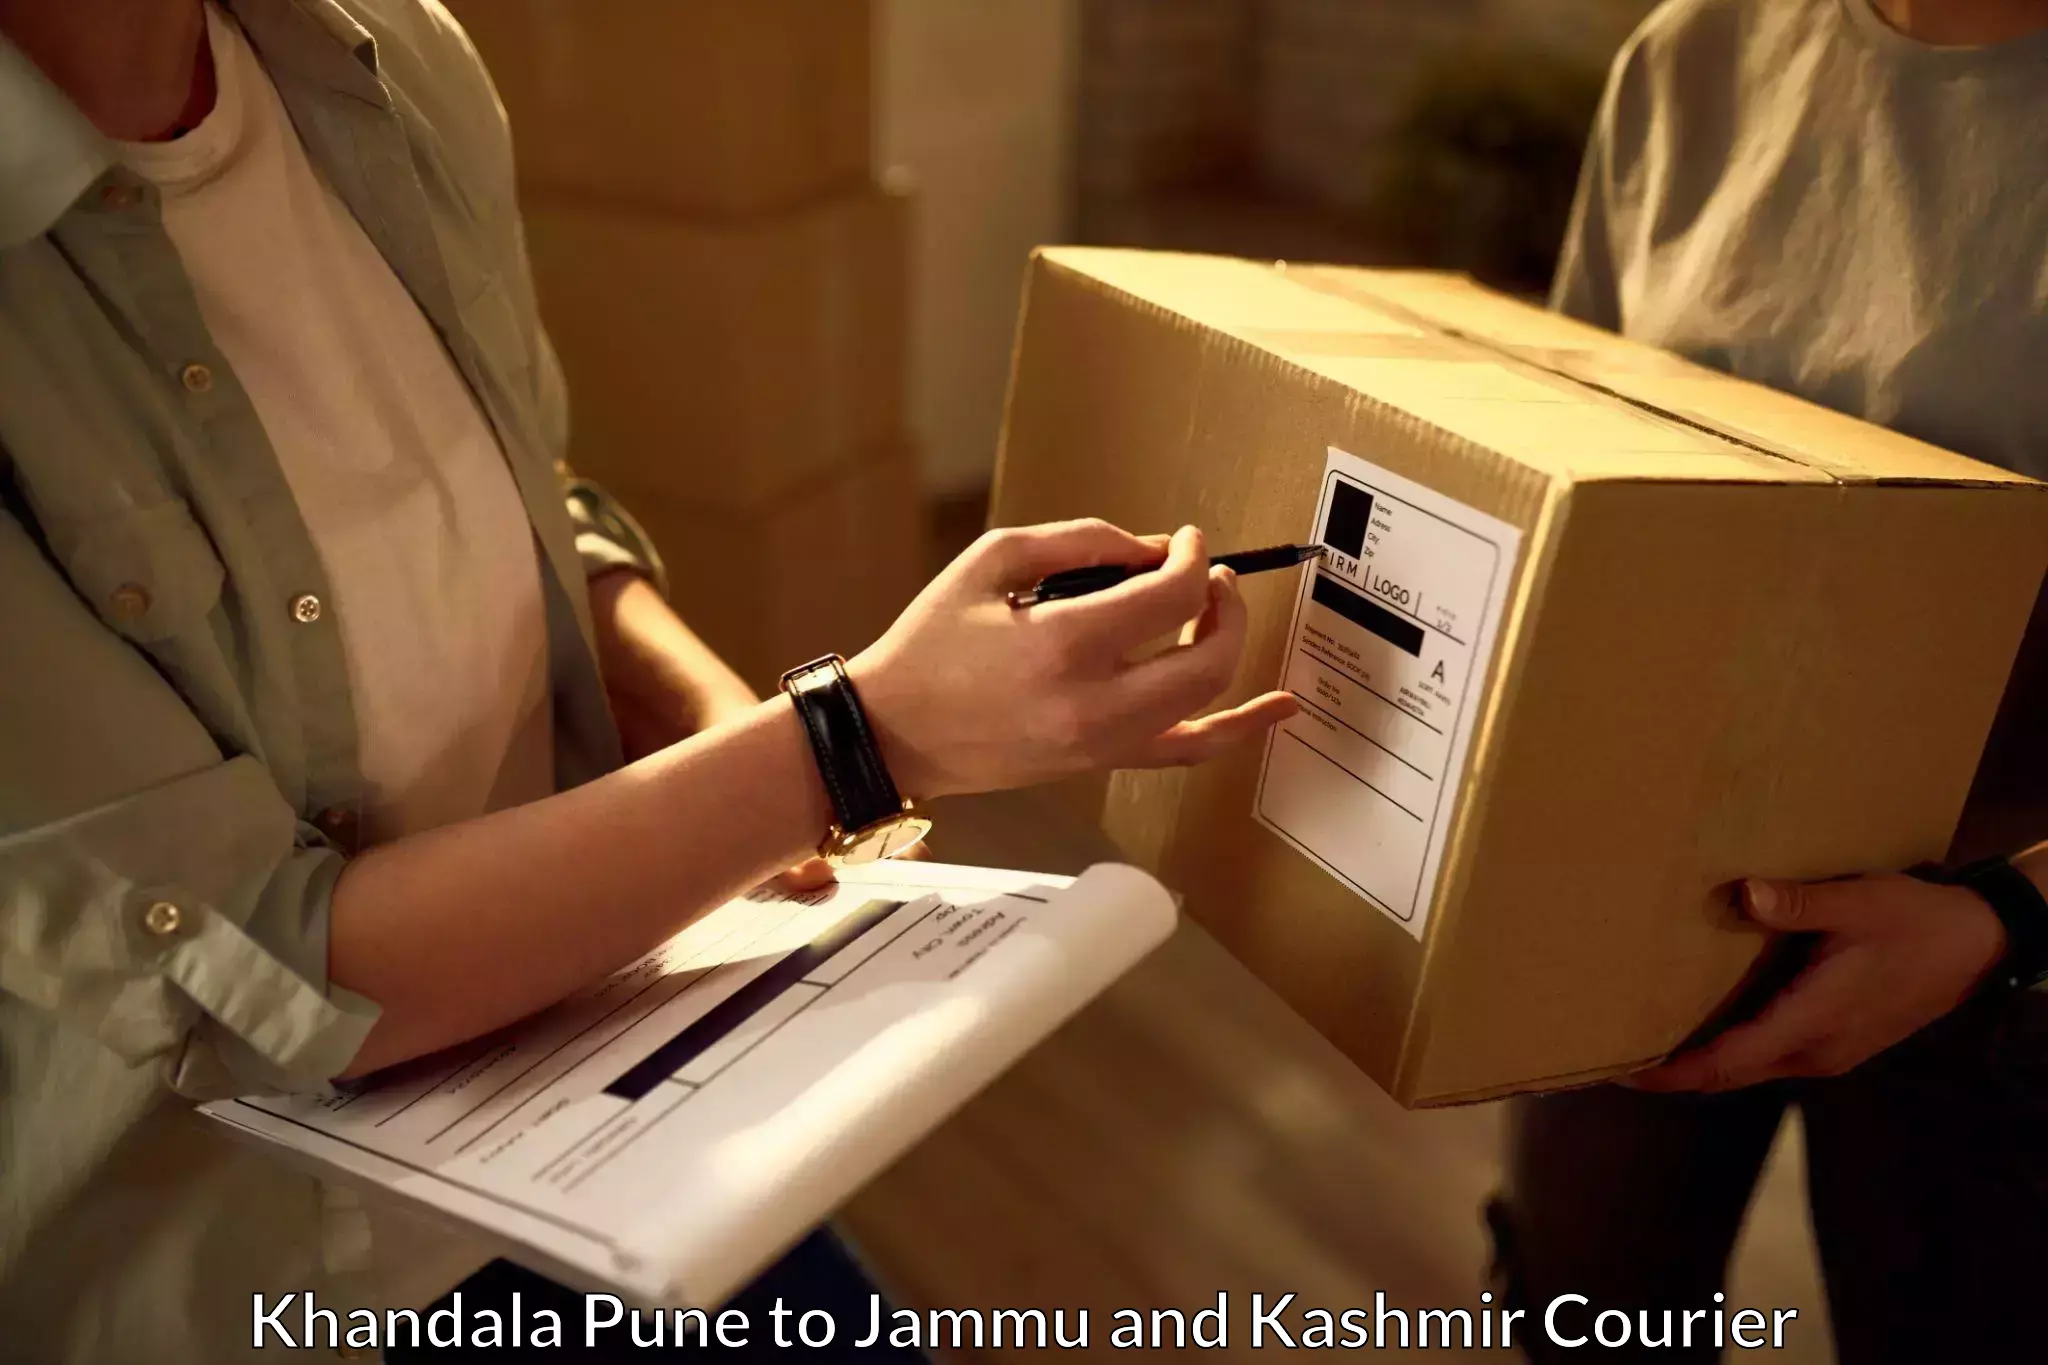 Parcel service for businesses Khandala Pune to Bhaderwah